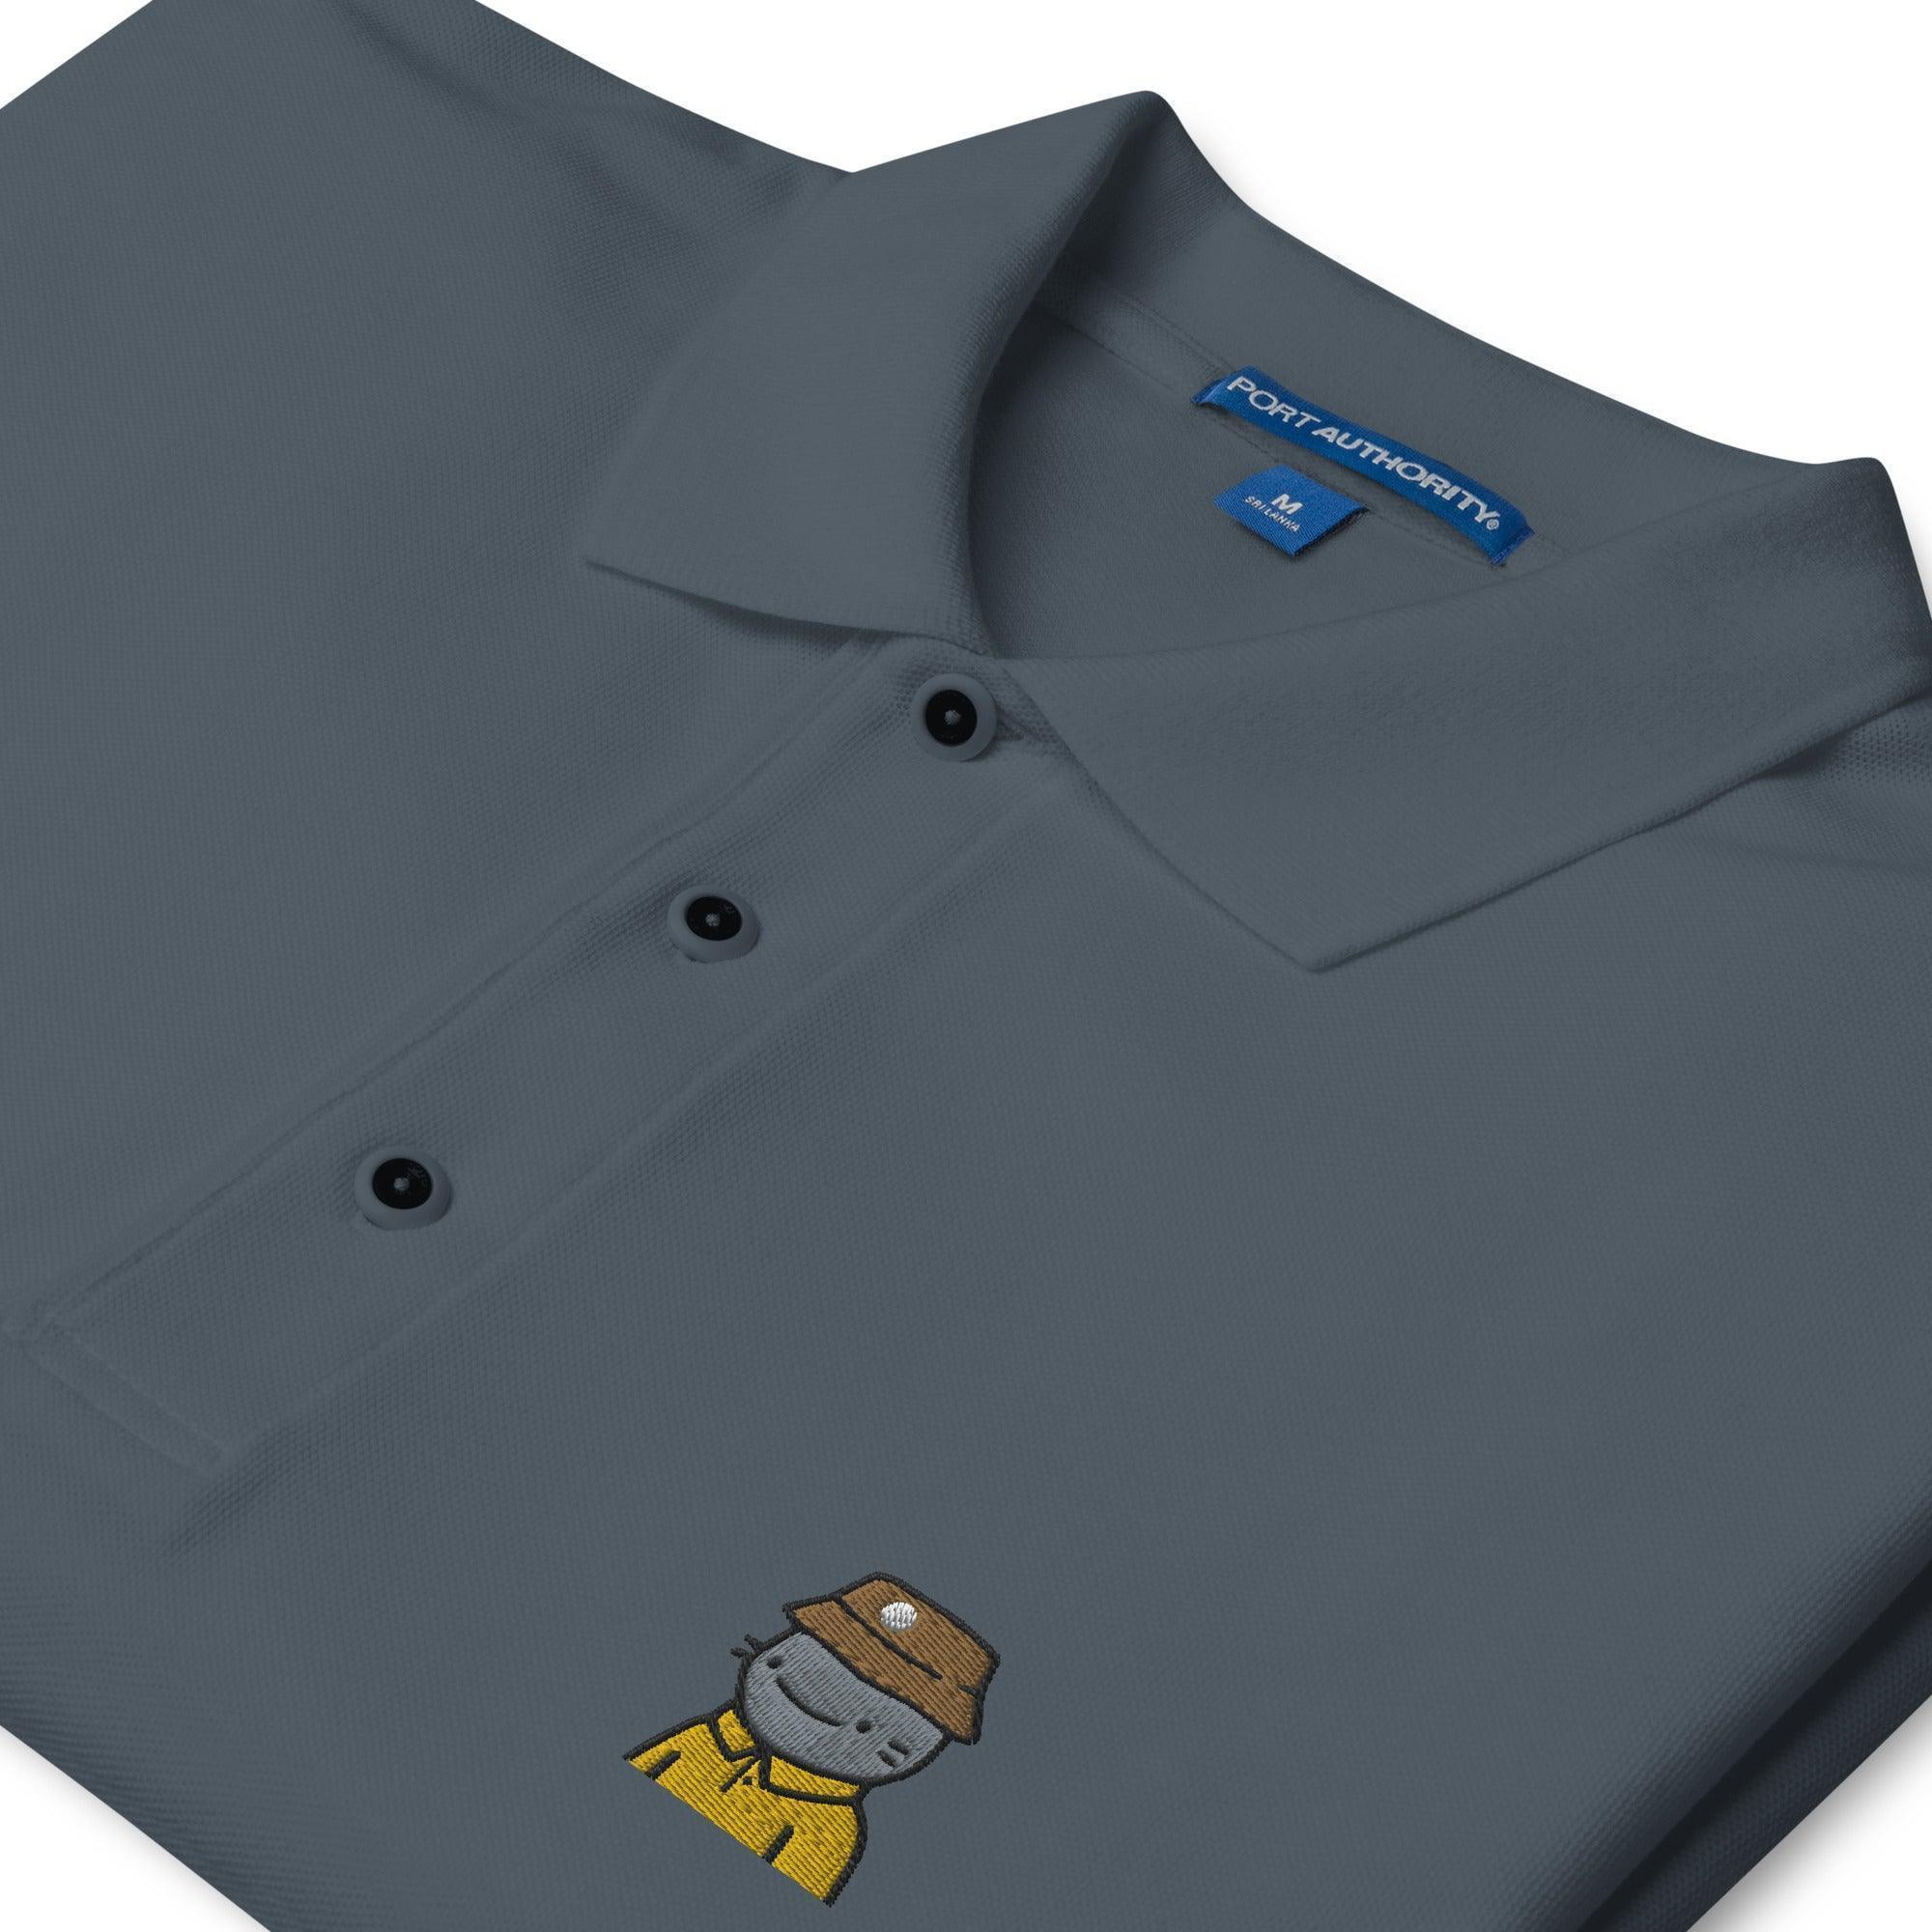 Cool Cats P1 Polo Shirt - InvestmenTees